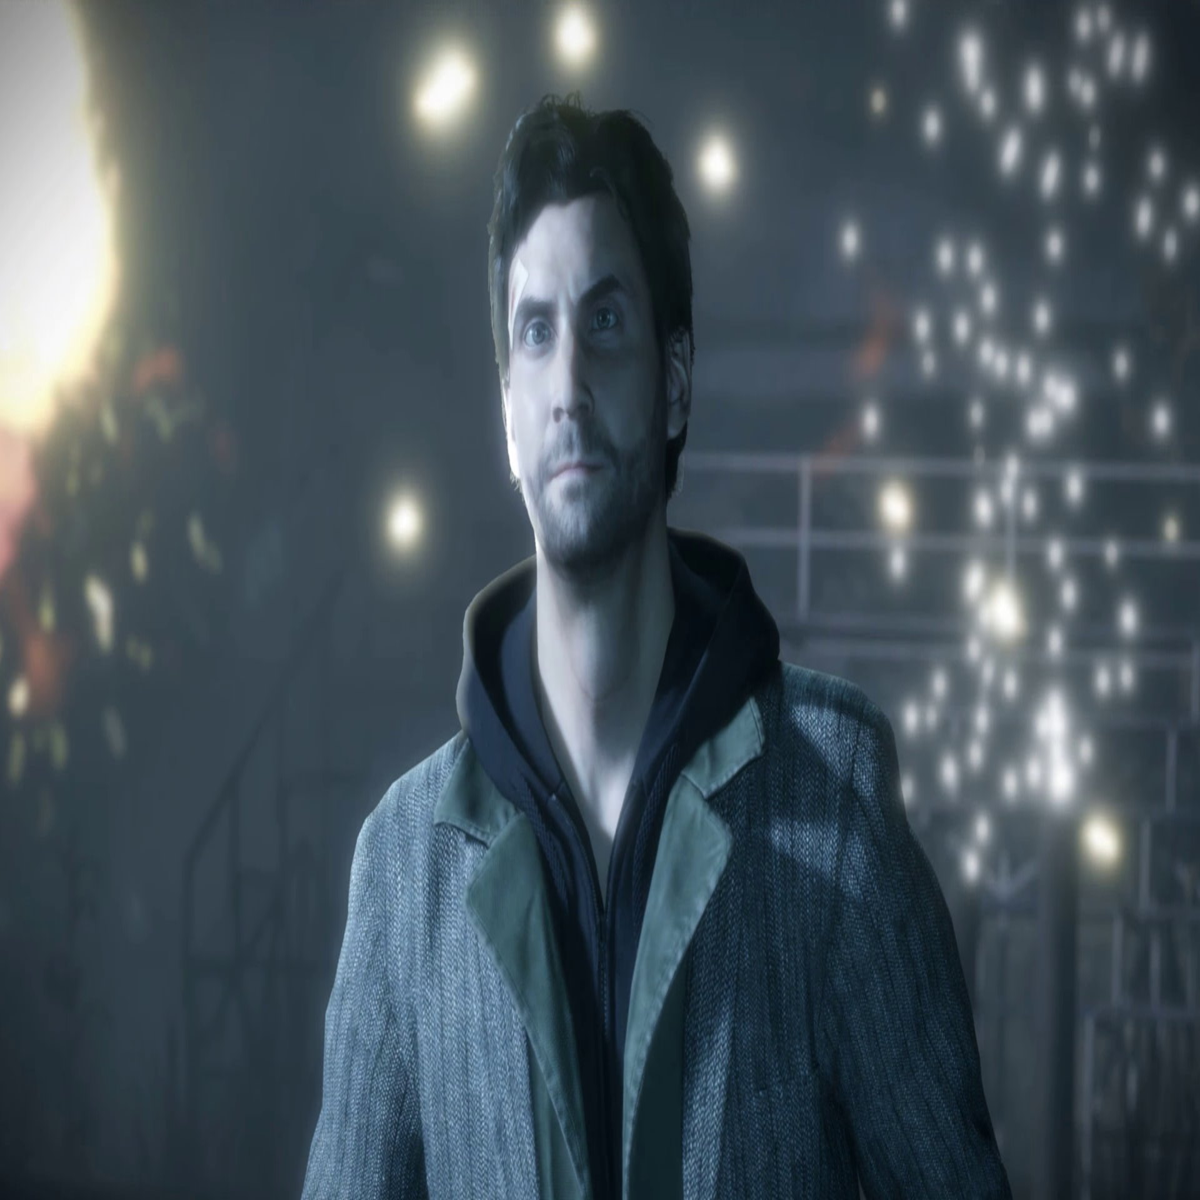 Alan Wake Remastered - Part 1 - ITS FINALLY HERE 